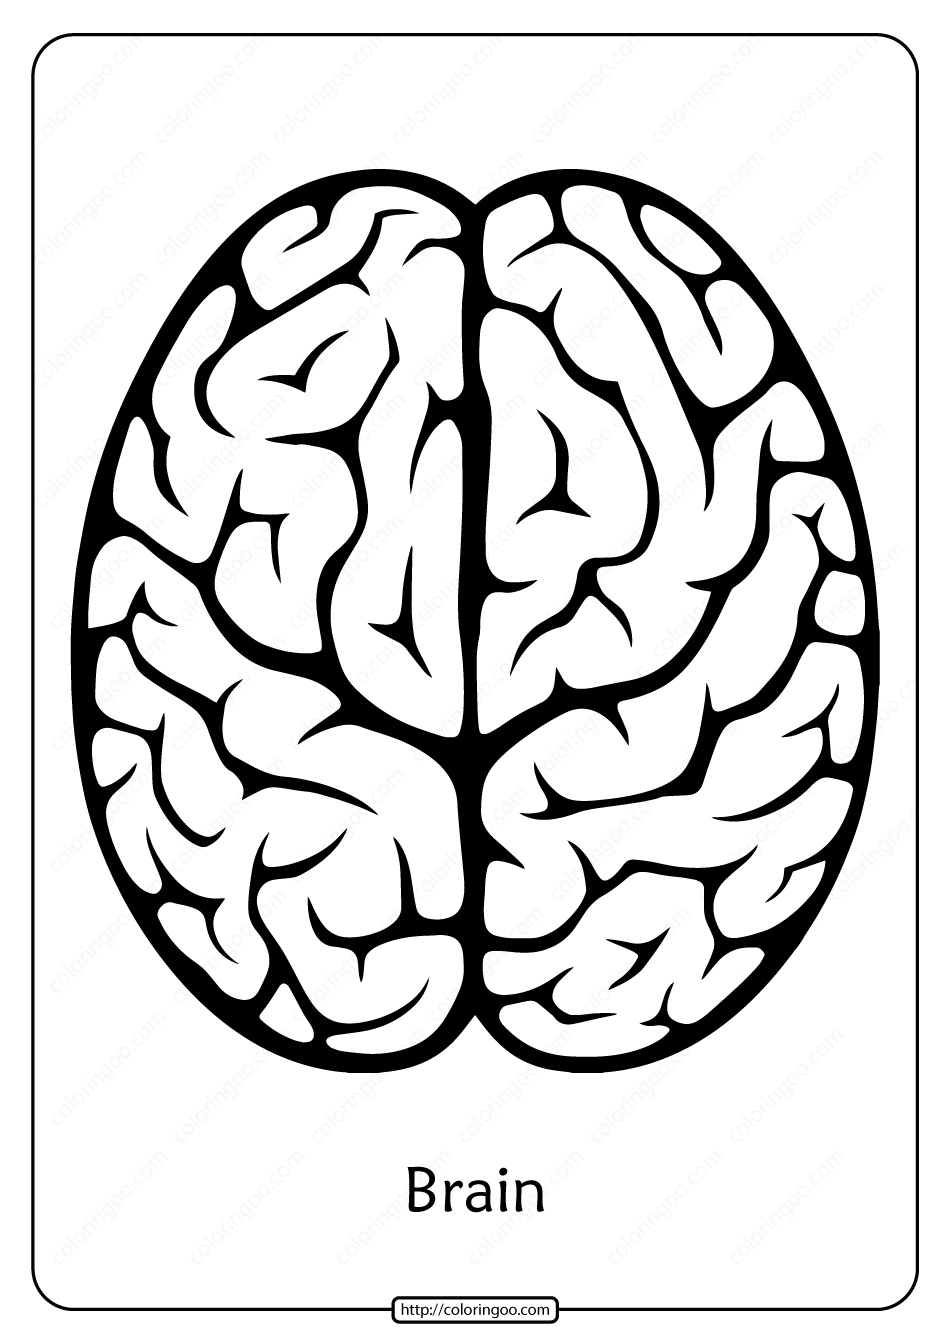 Download Coloring Page Of The Brain PNG